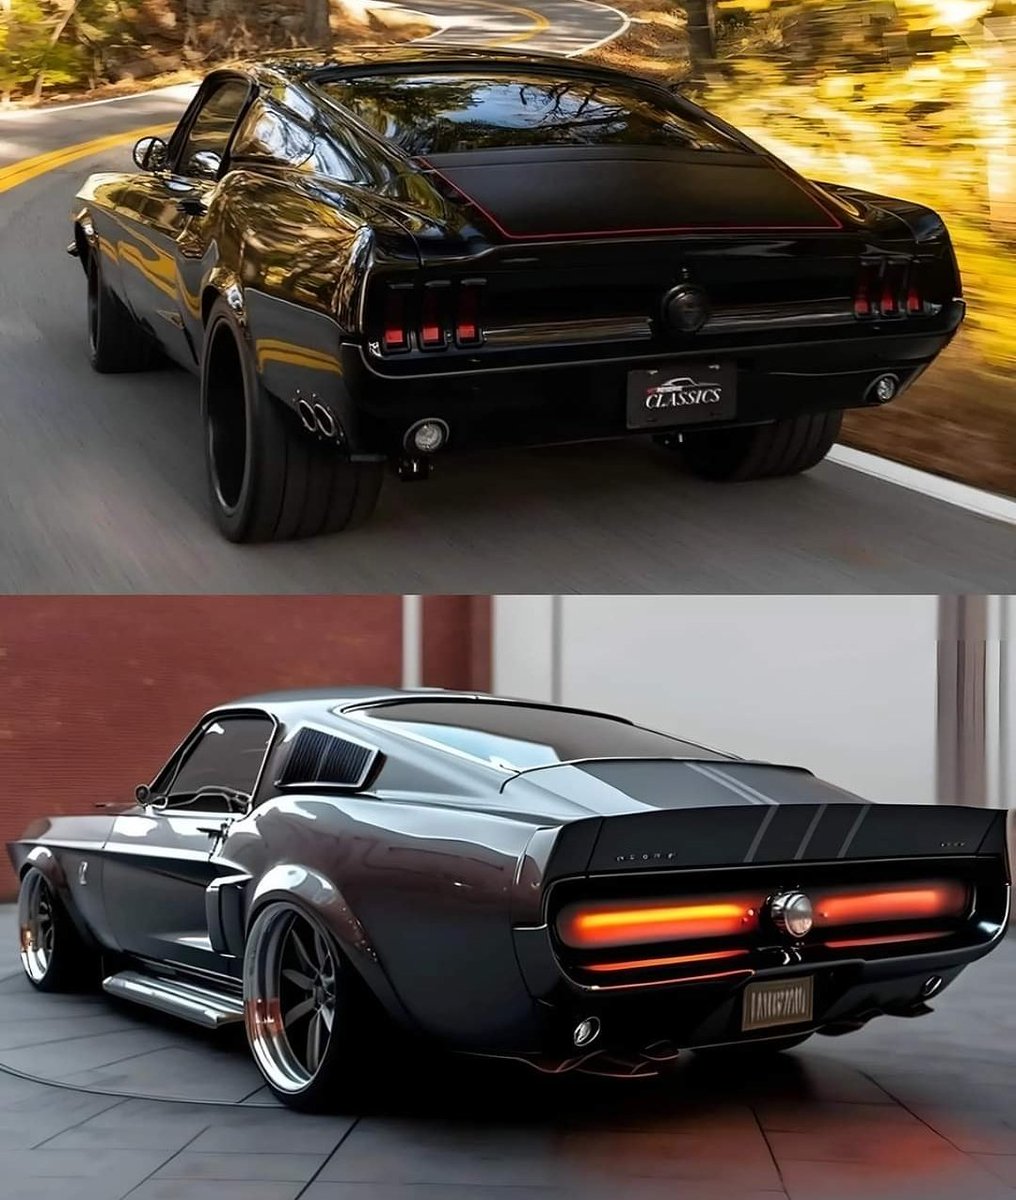 Top or bottom?